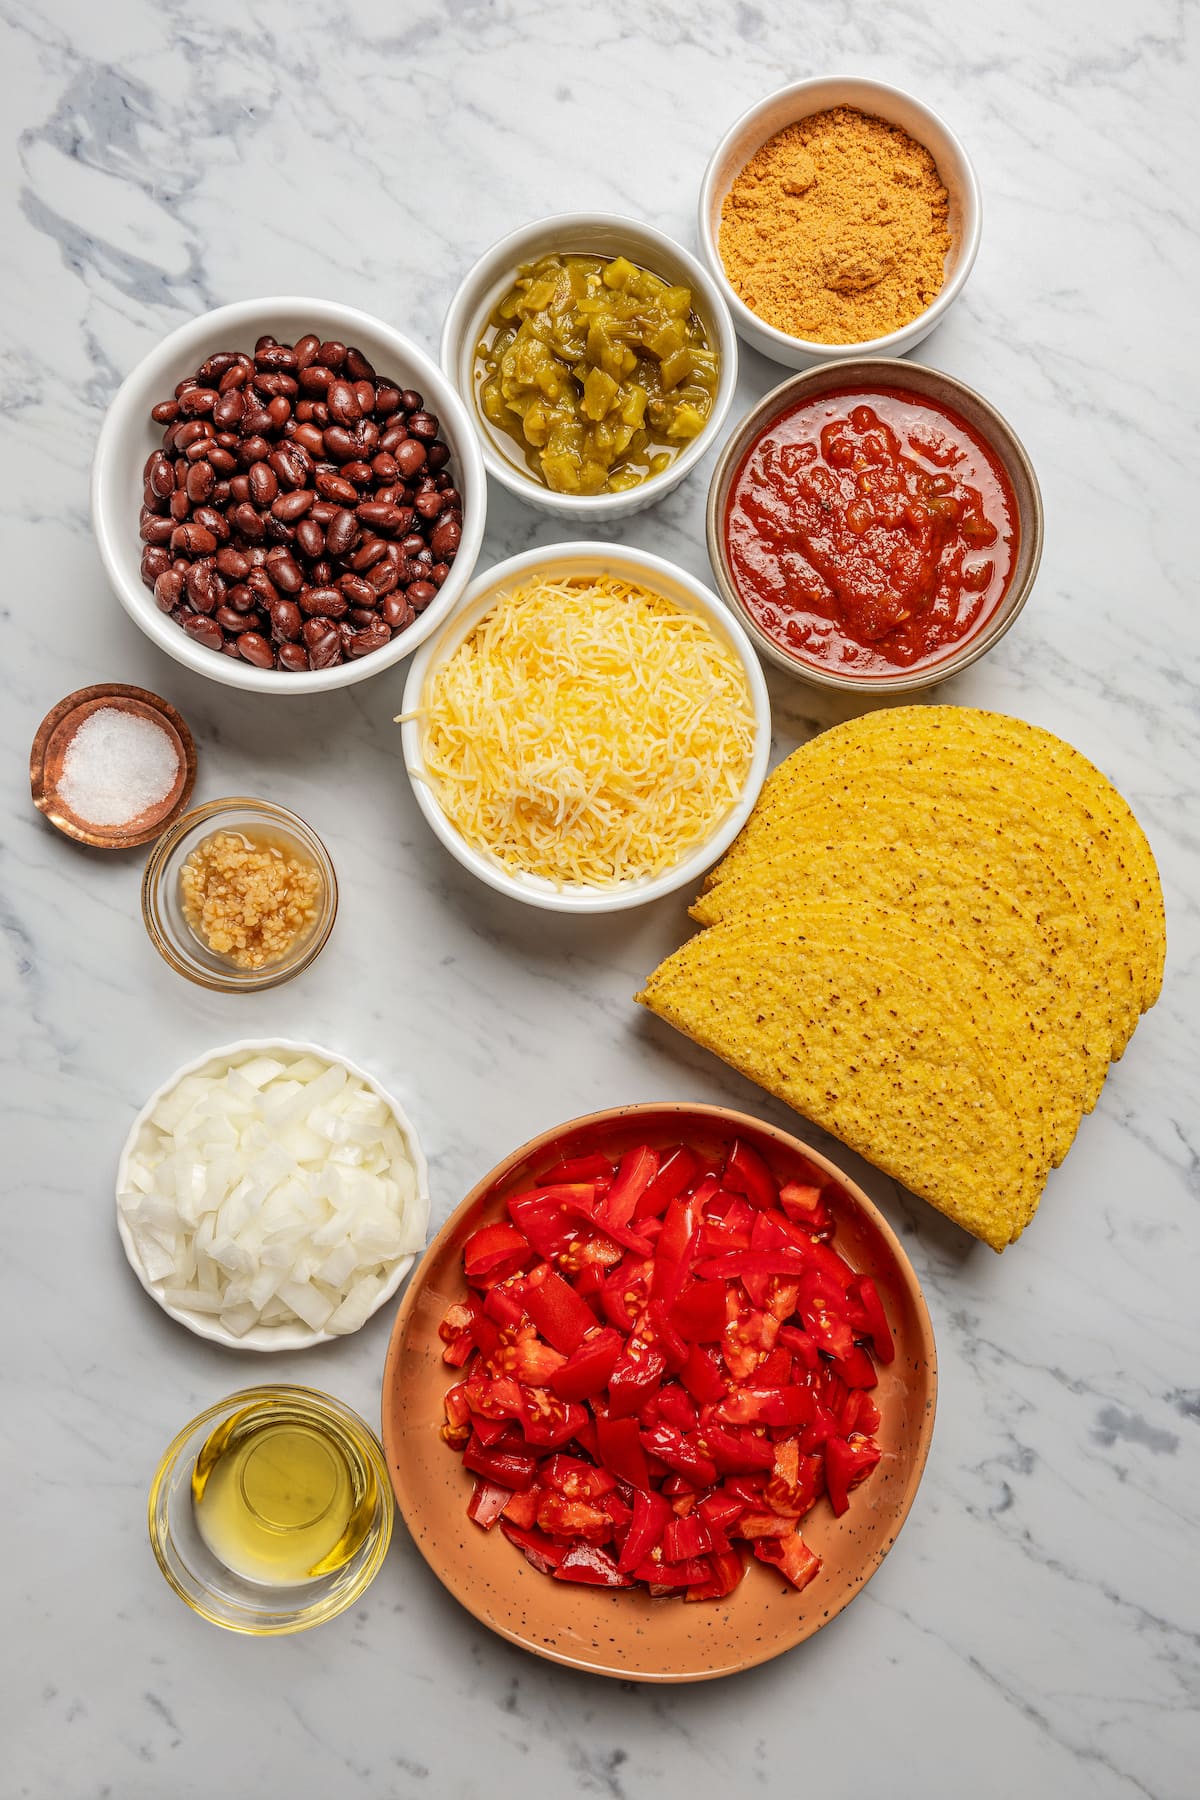 Ingredients for baked tacos.